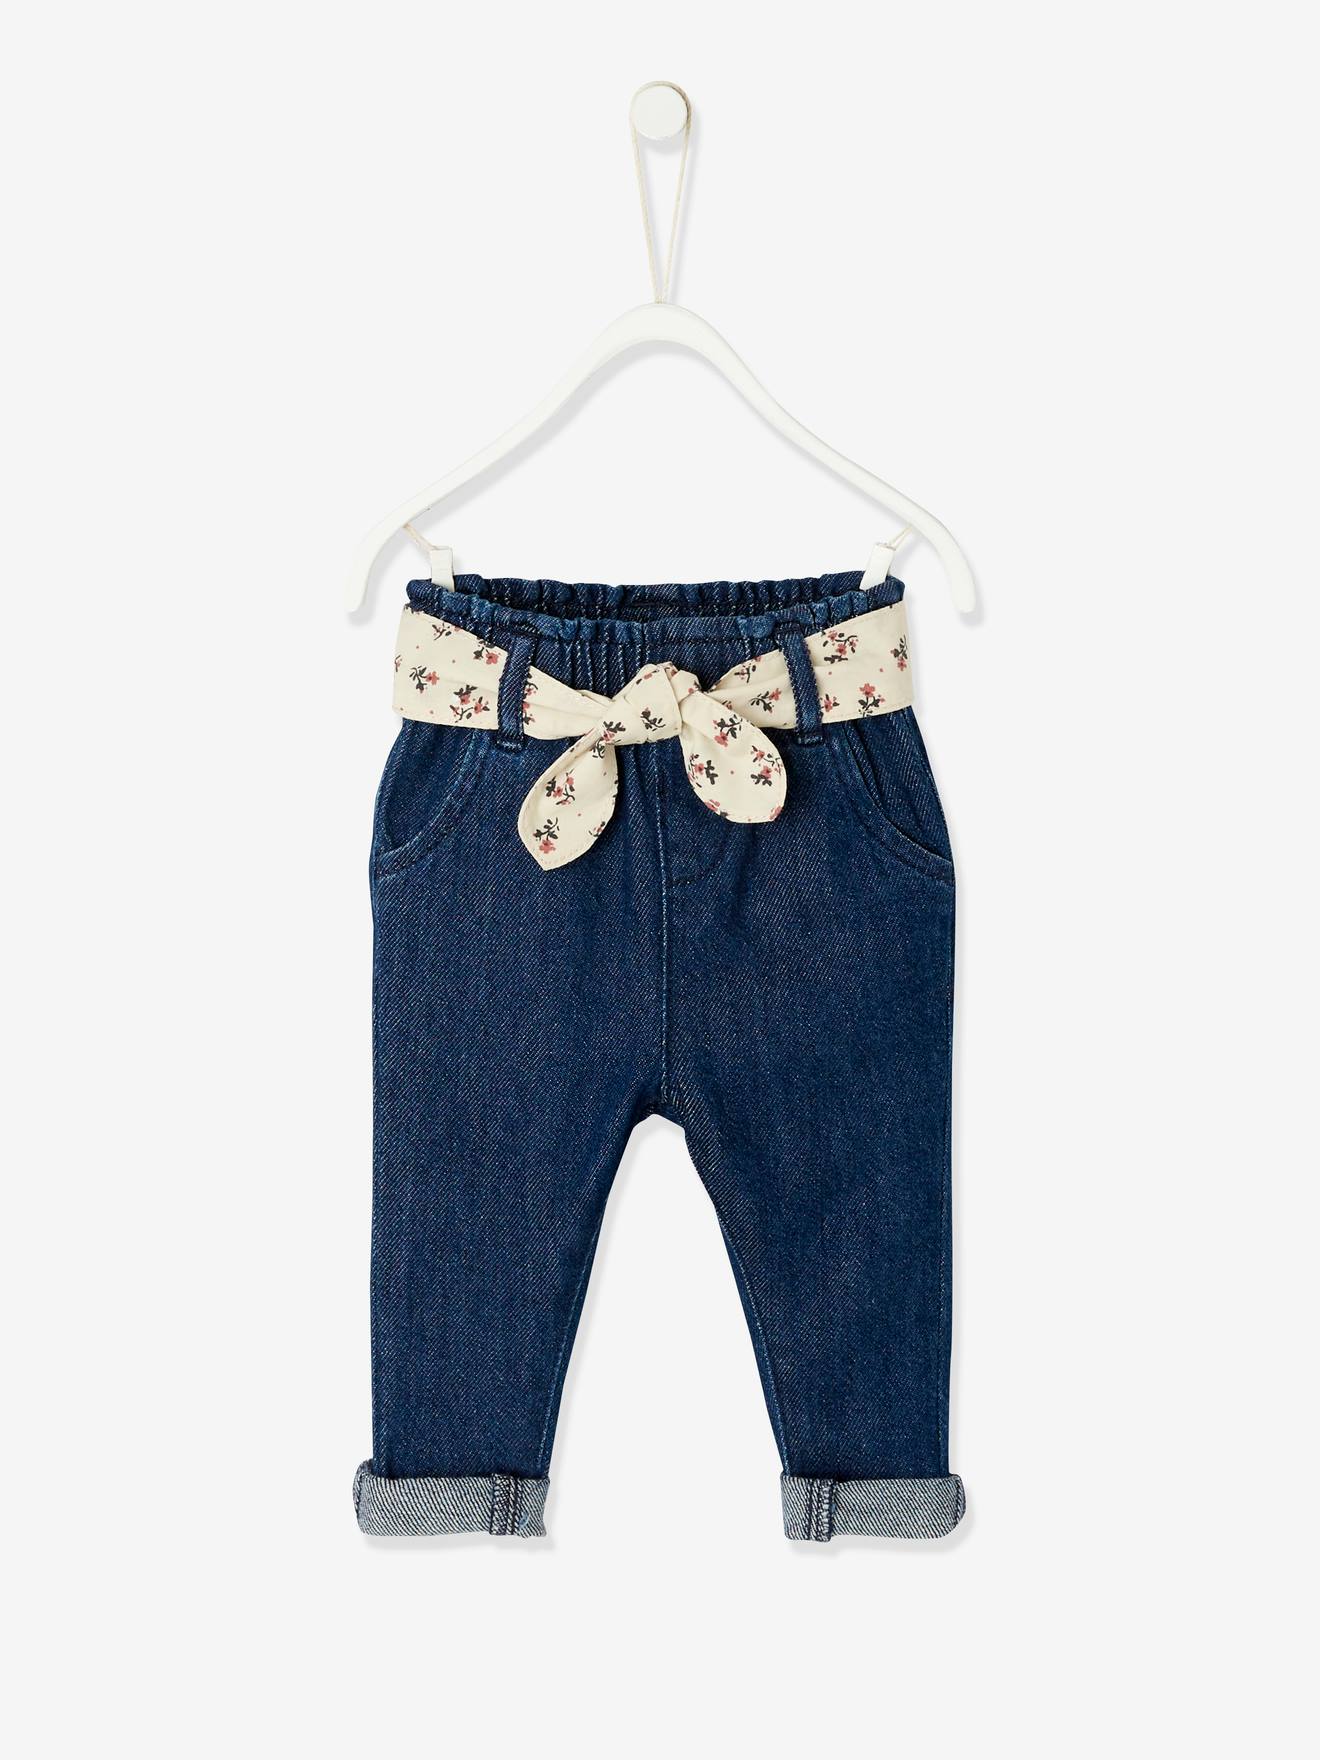 Trousers with Fabric Belt for Babies dark blue